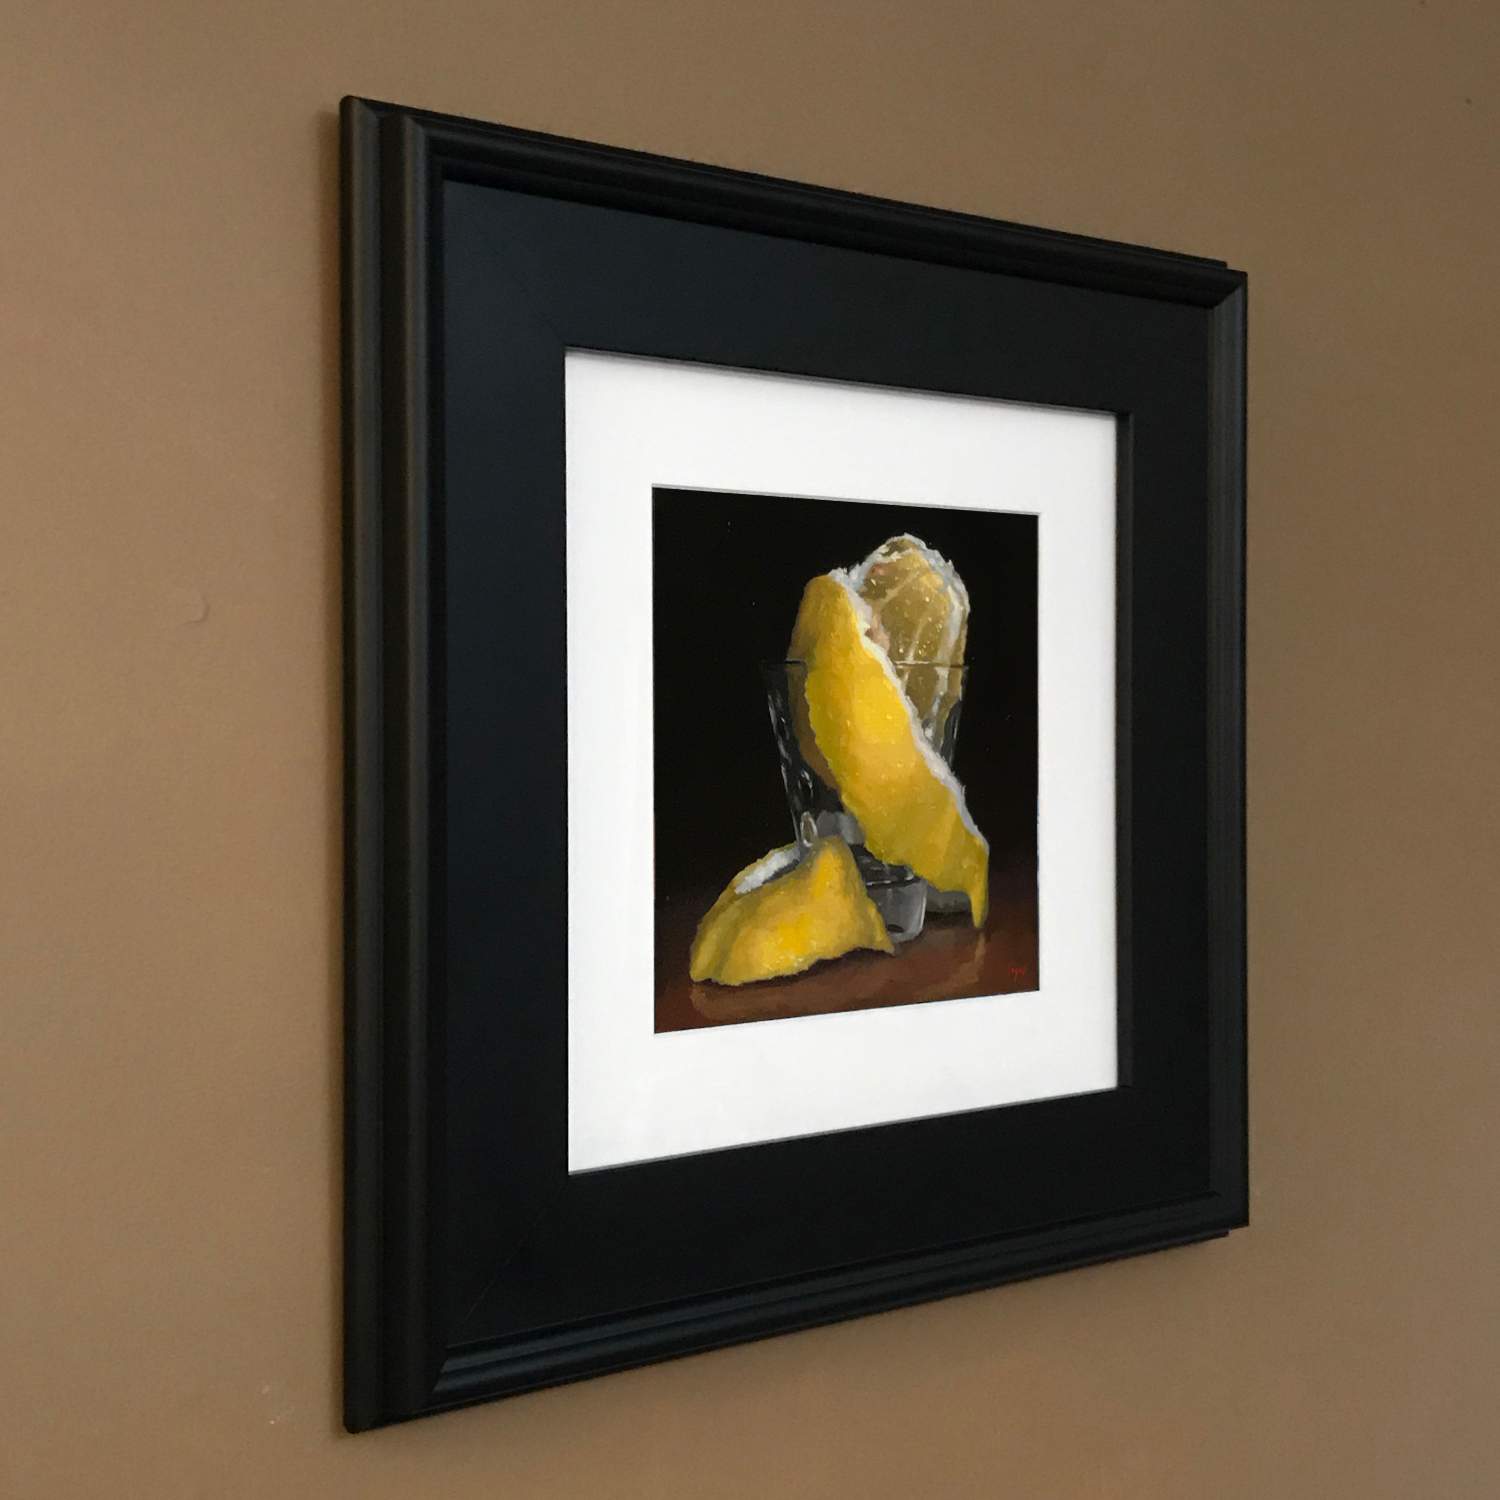 Matted Print with Black Frame